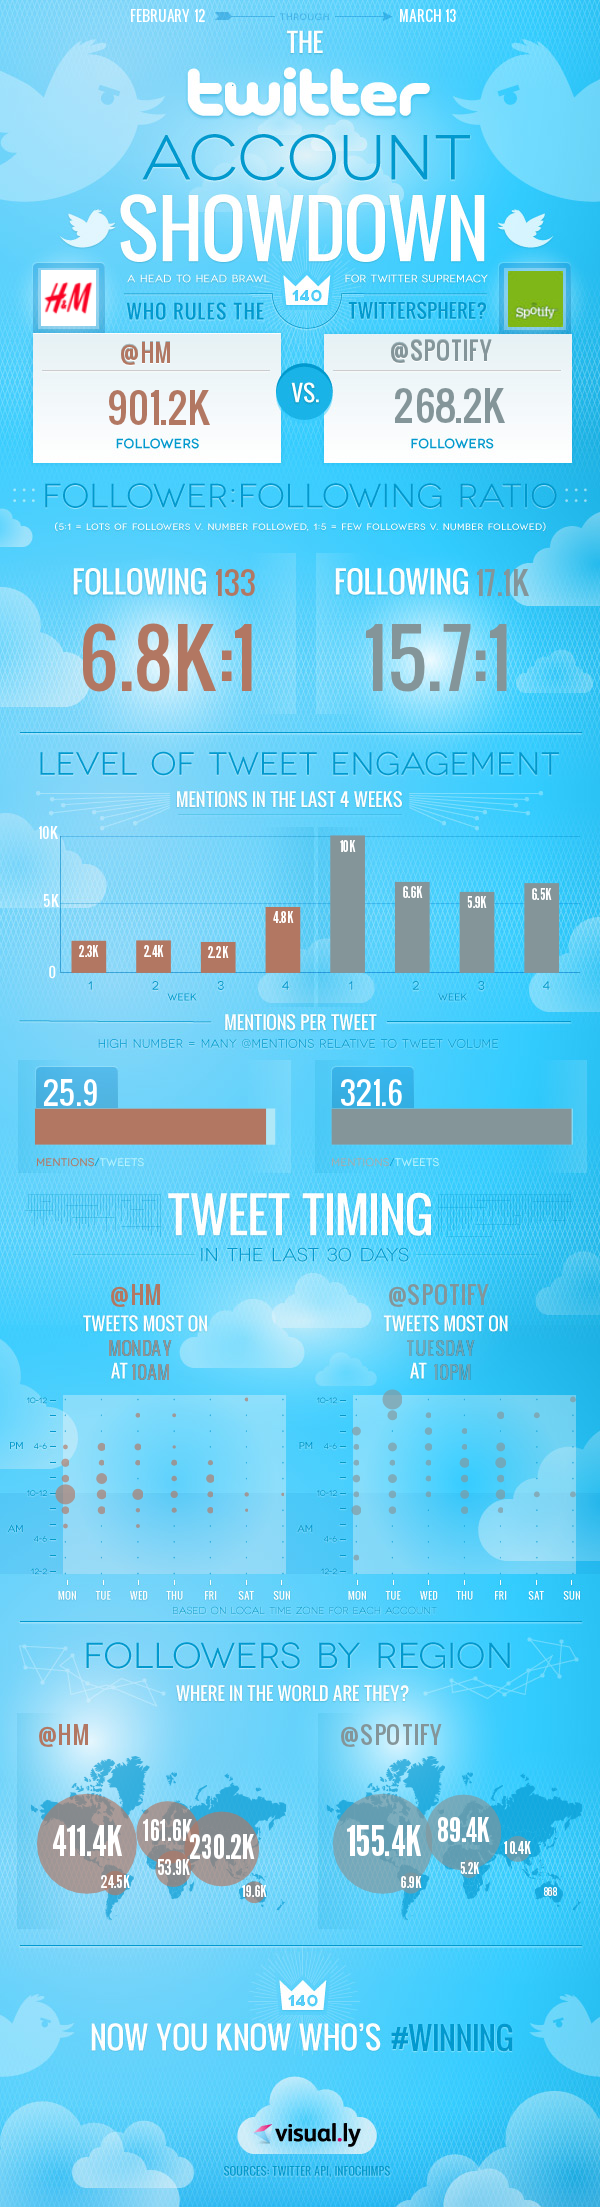 infographic-twitter